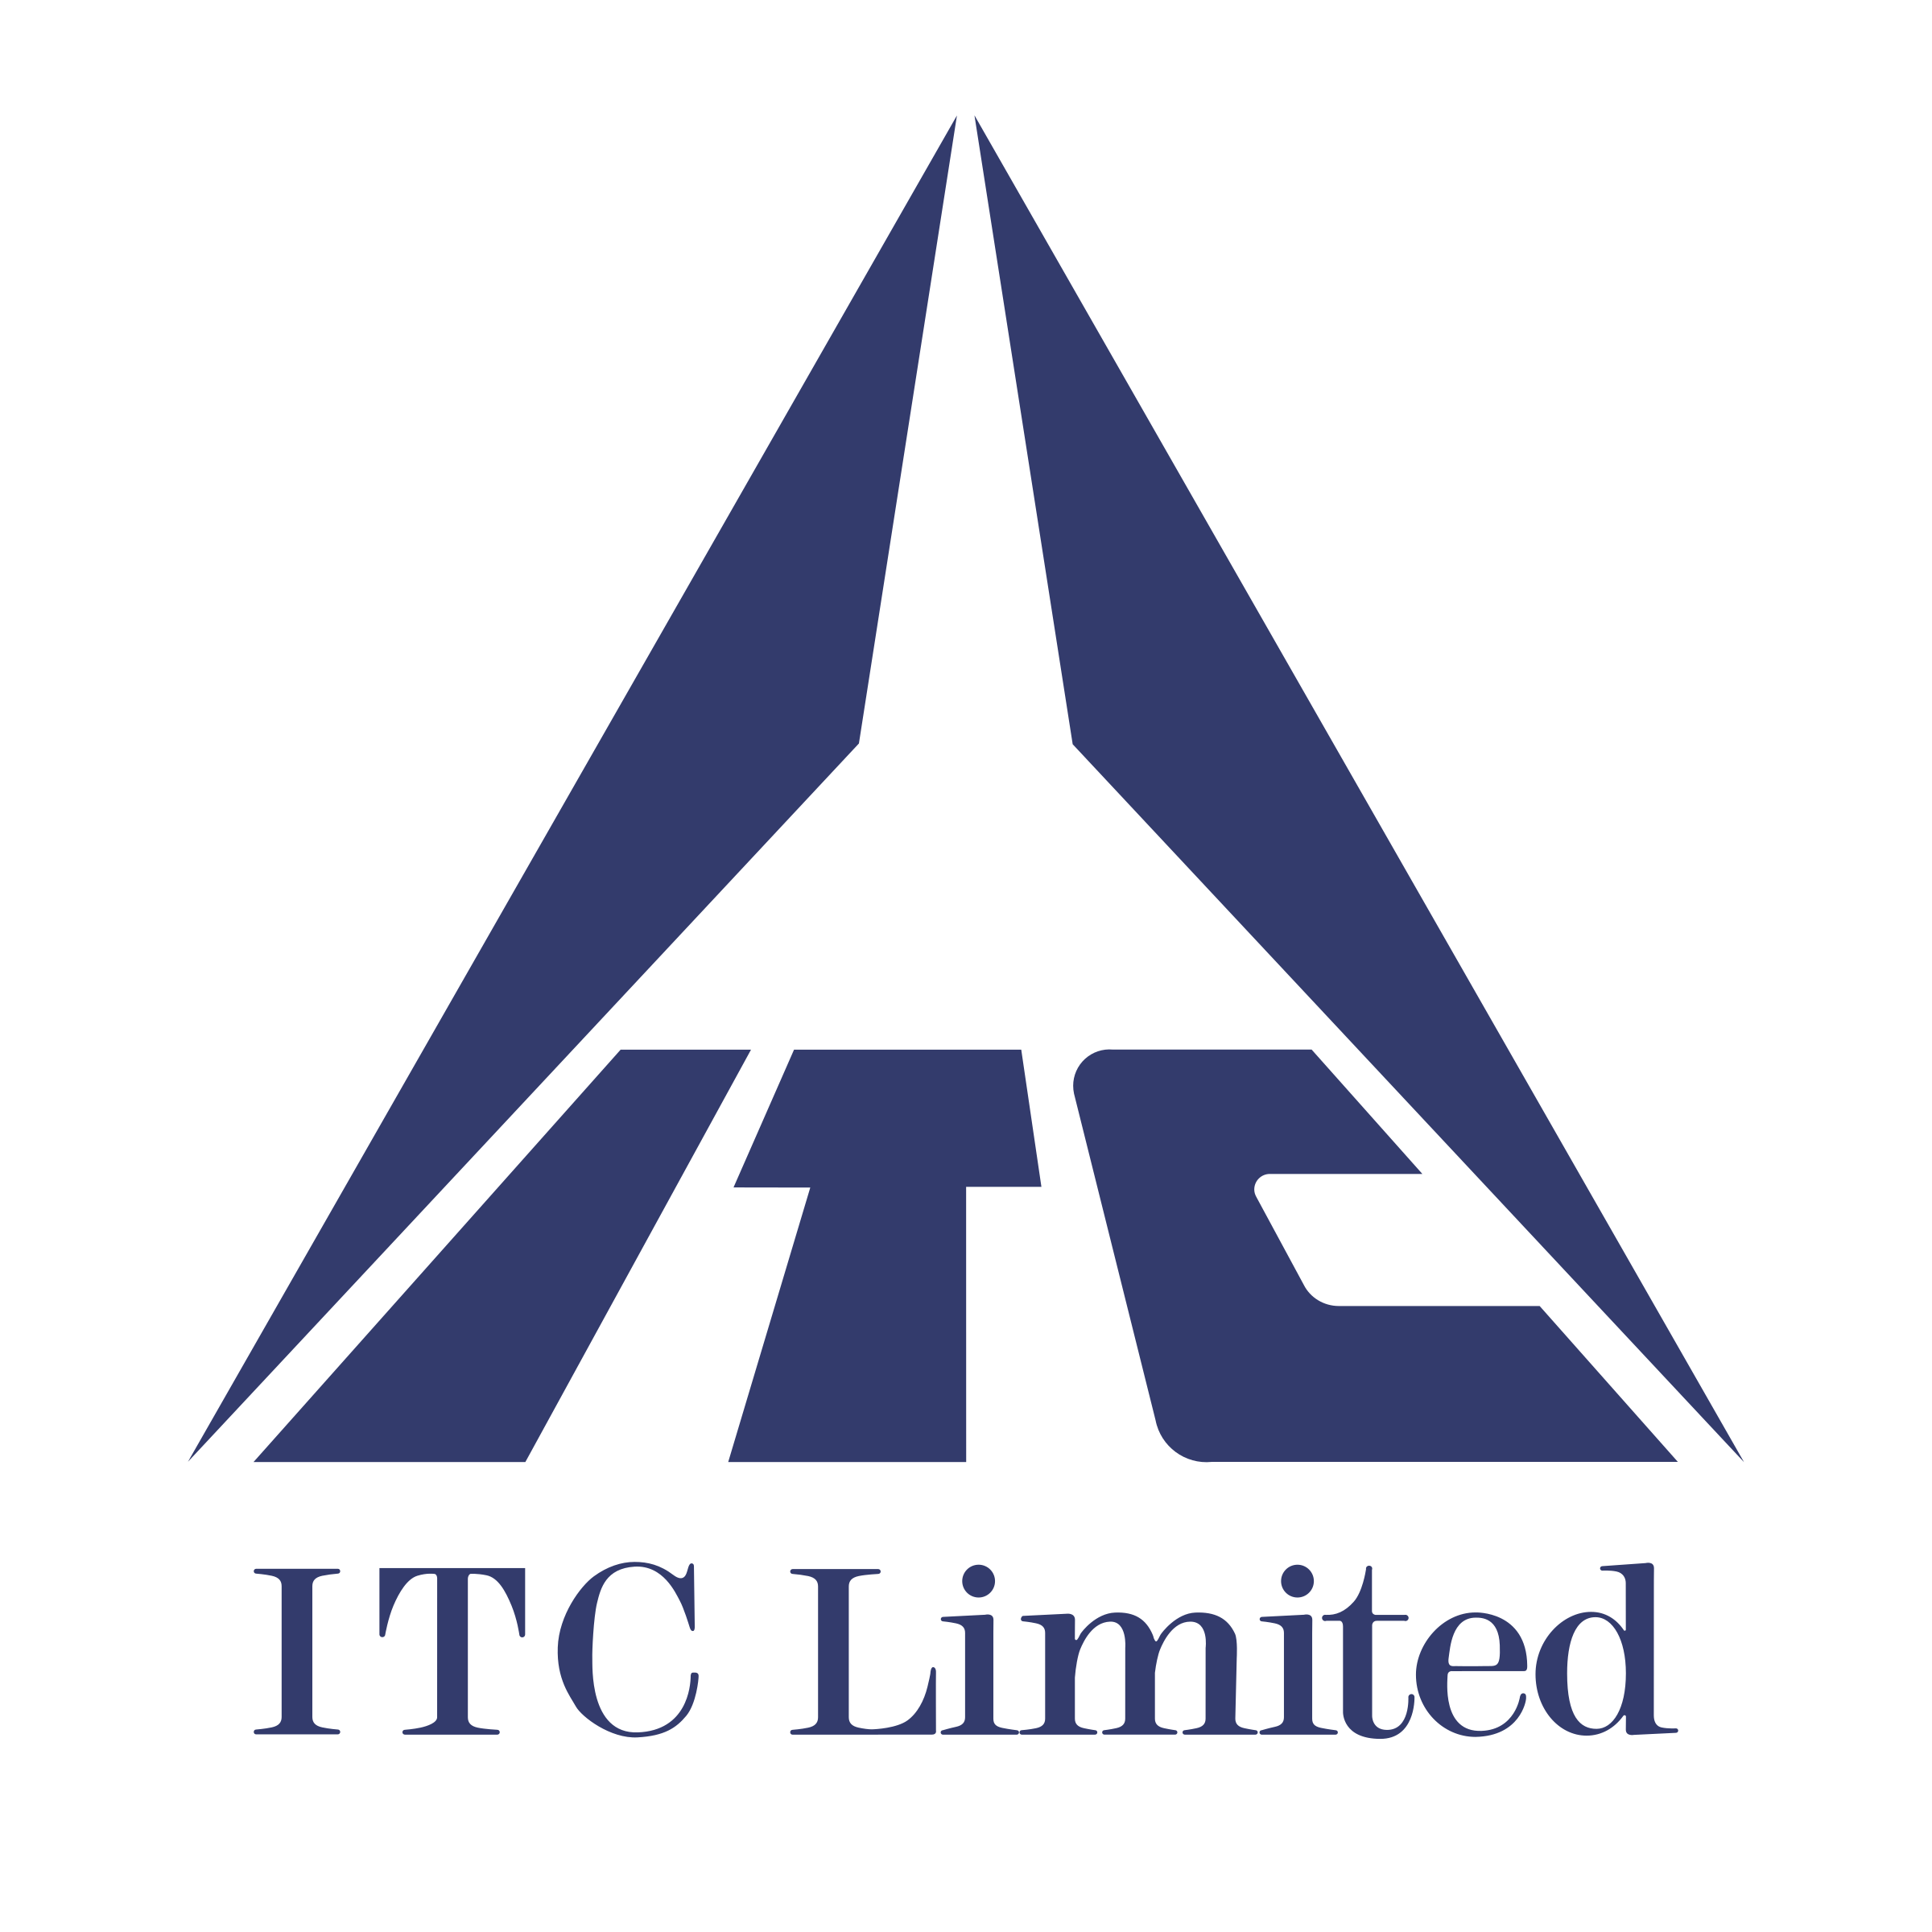 itc-limited-logo-png-transparent